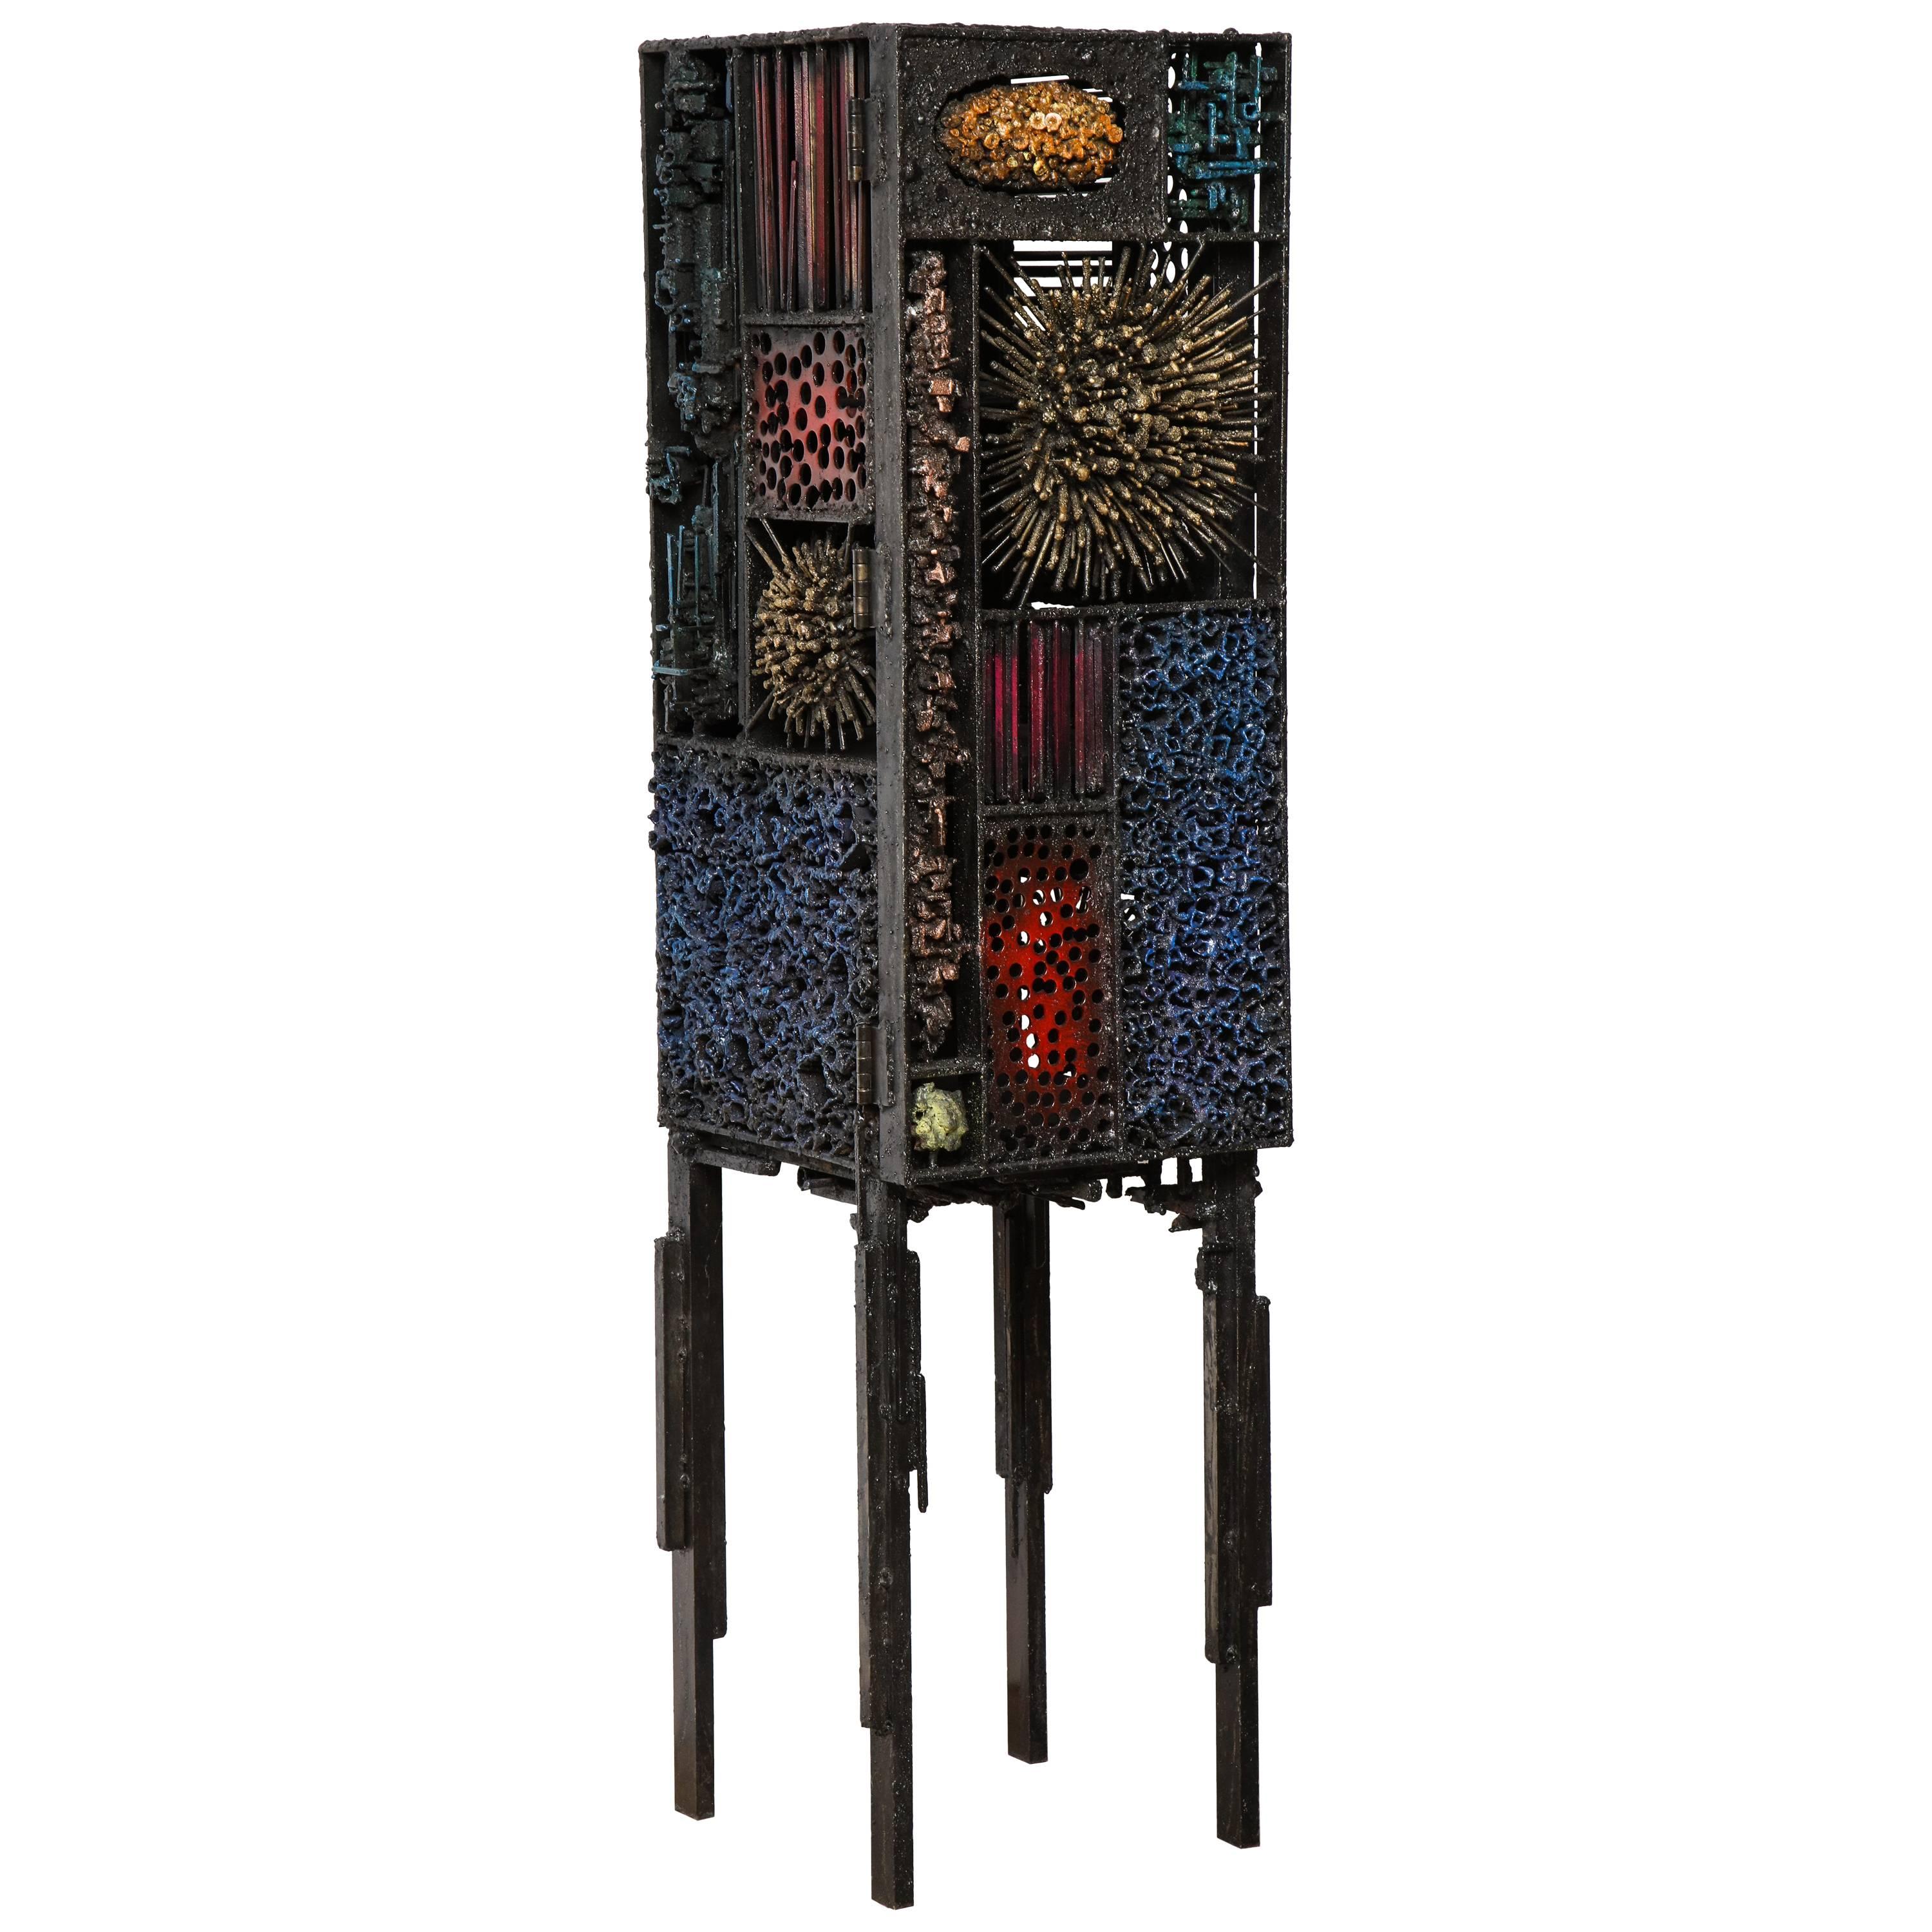 James Bearden "Segment Cabinet" in Polychromed and Bronzed Steel